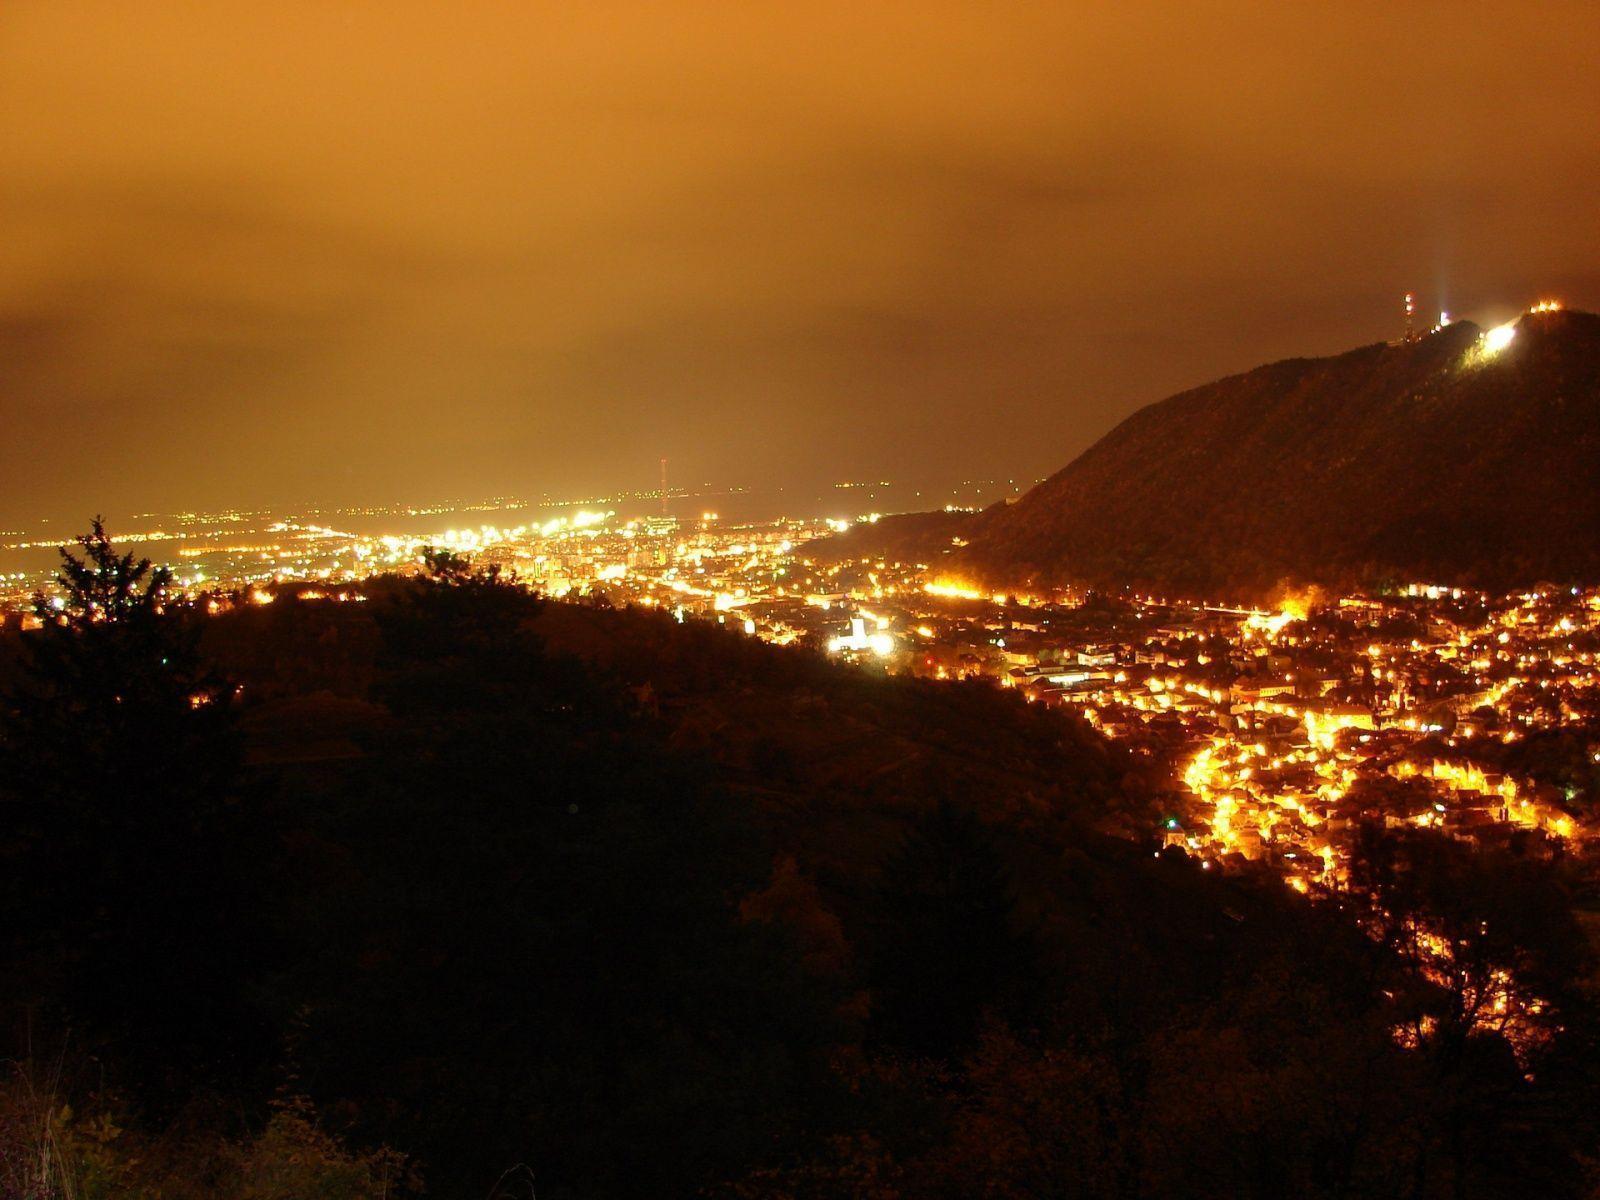 Brasov Night wallpaper and image, picture, photo